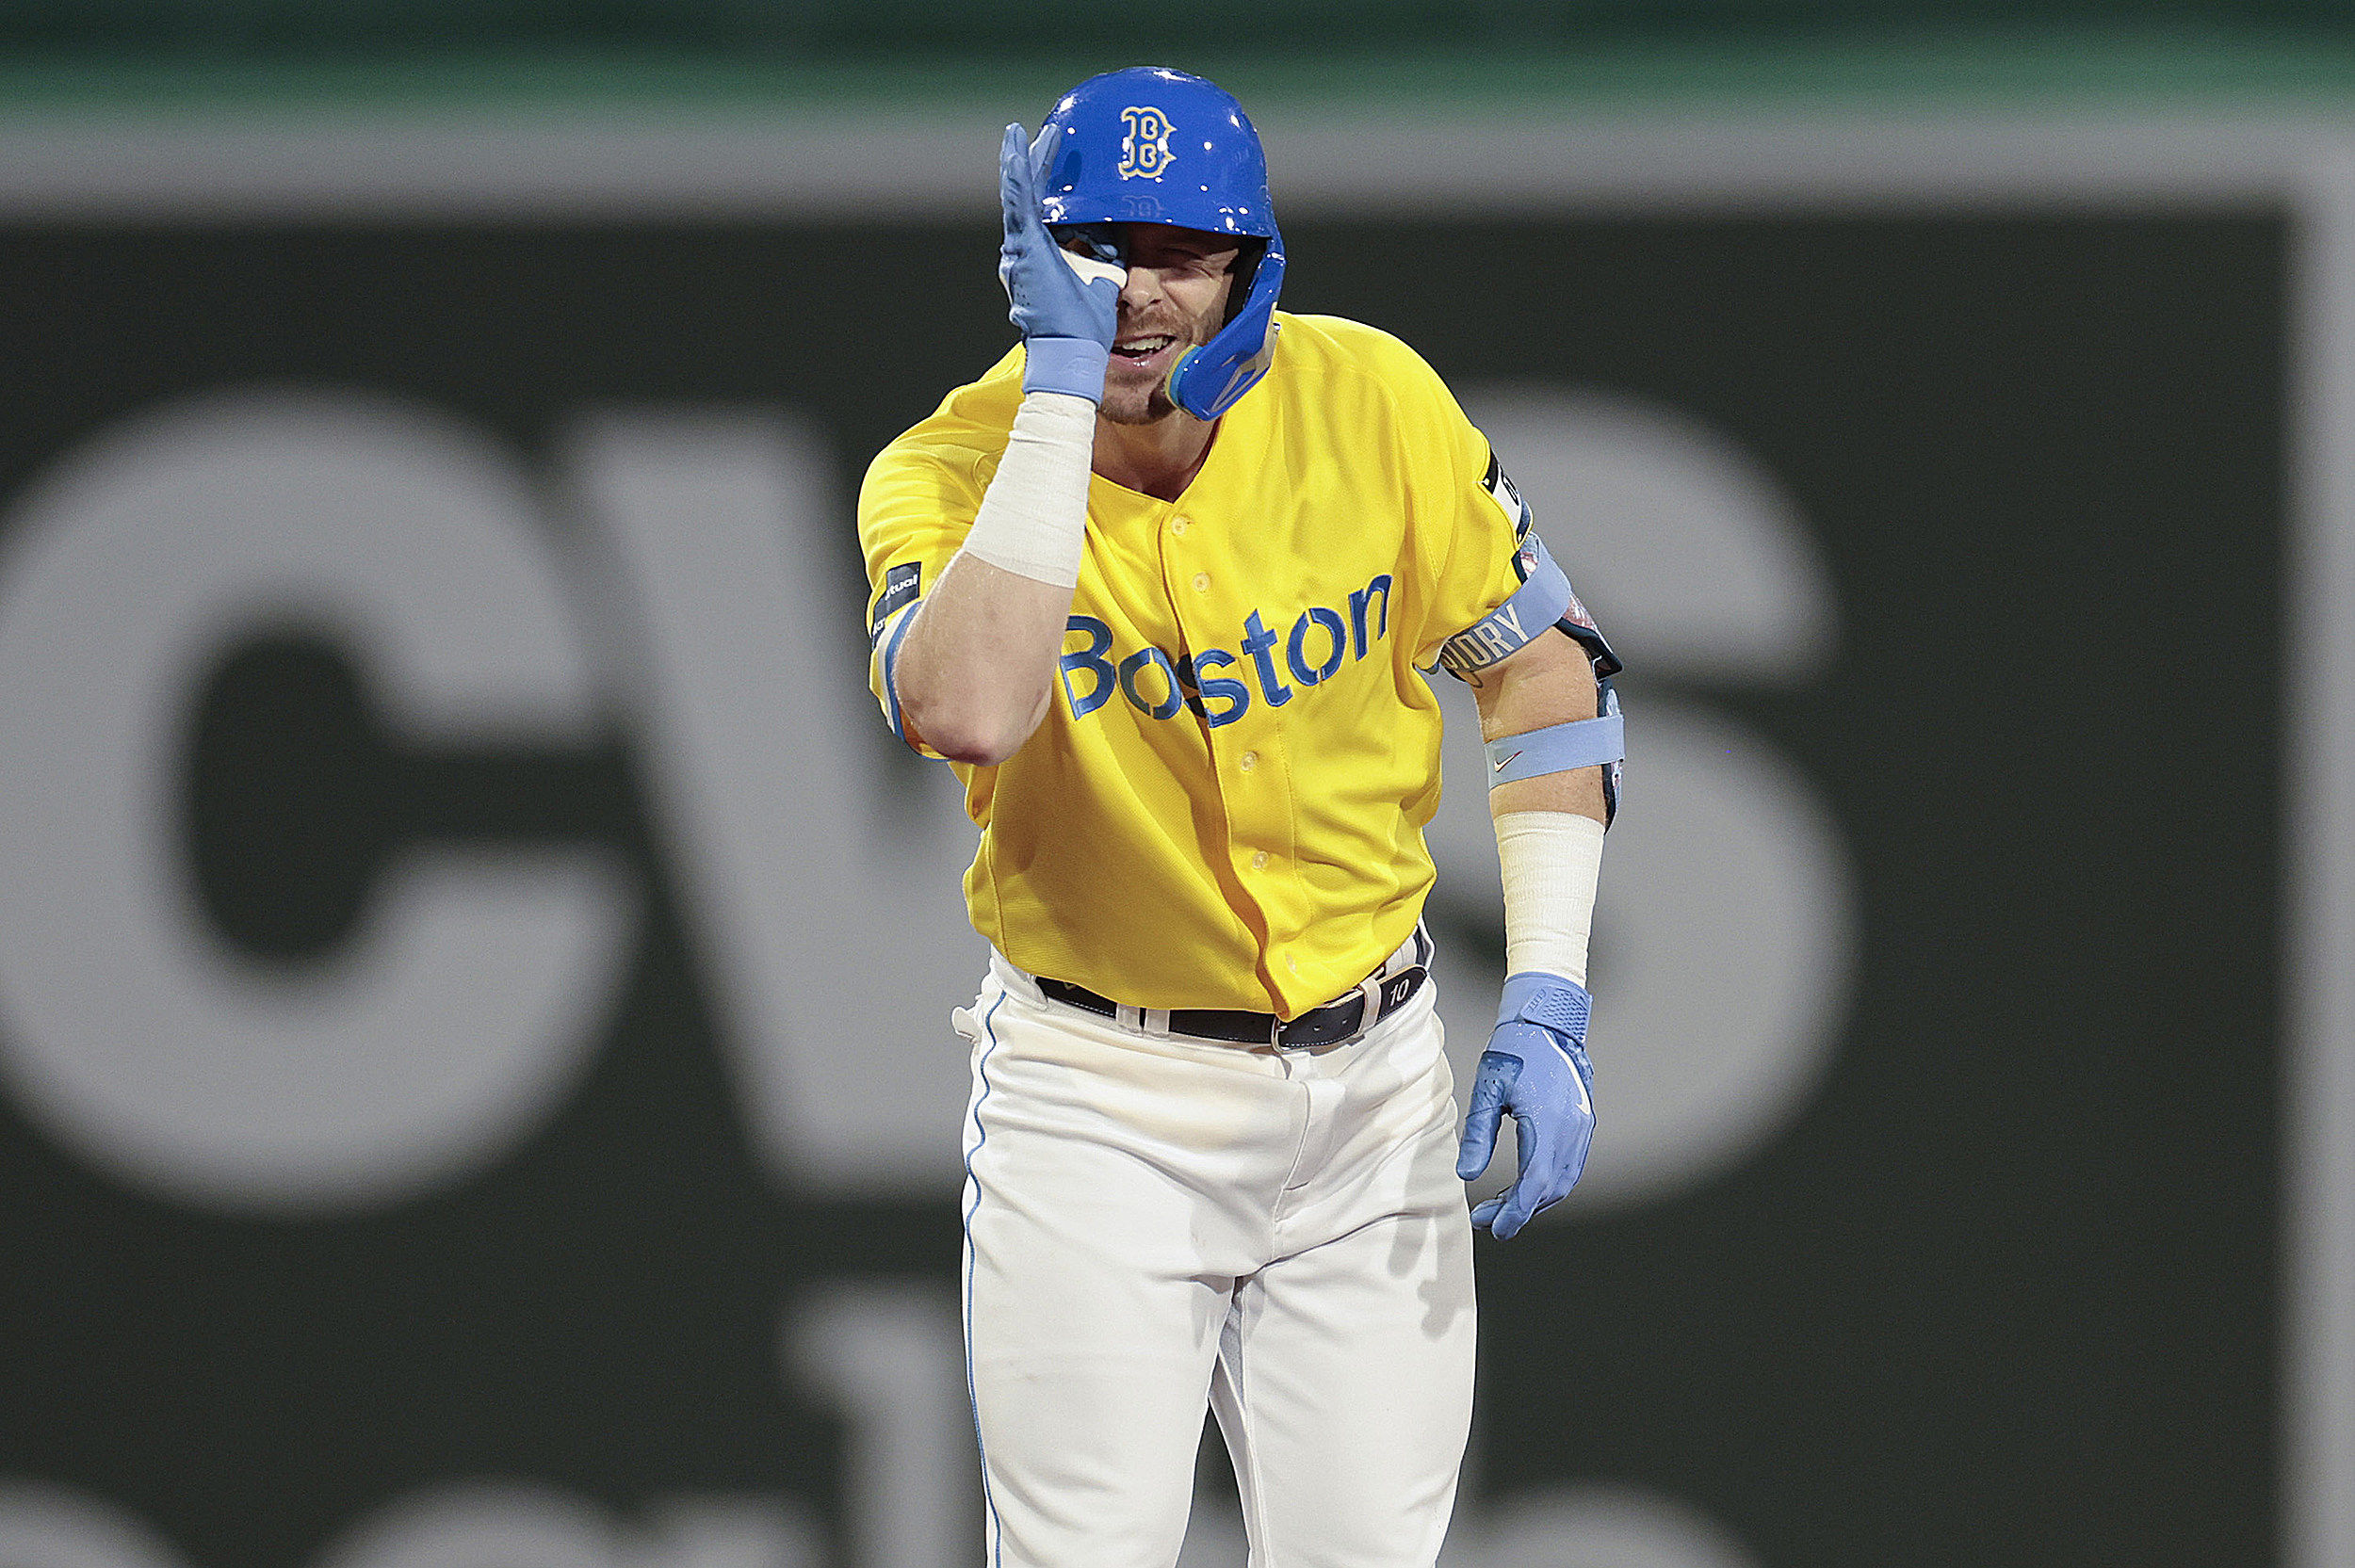 sox blue and yellow uniform